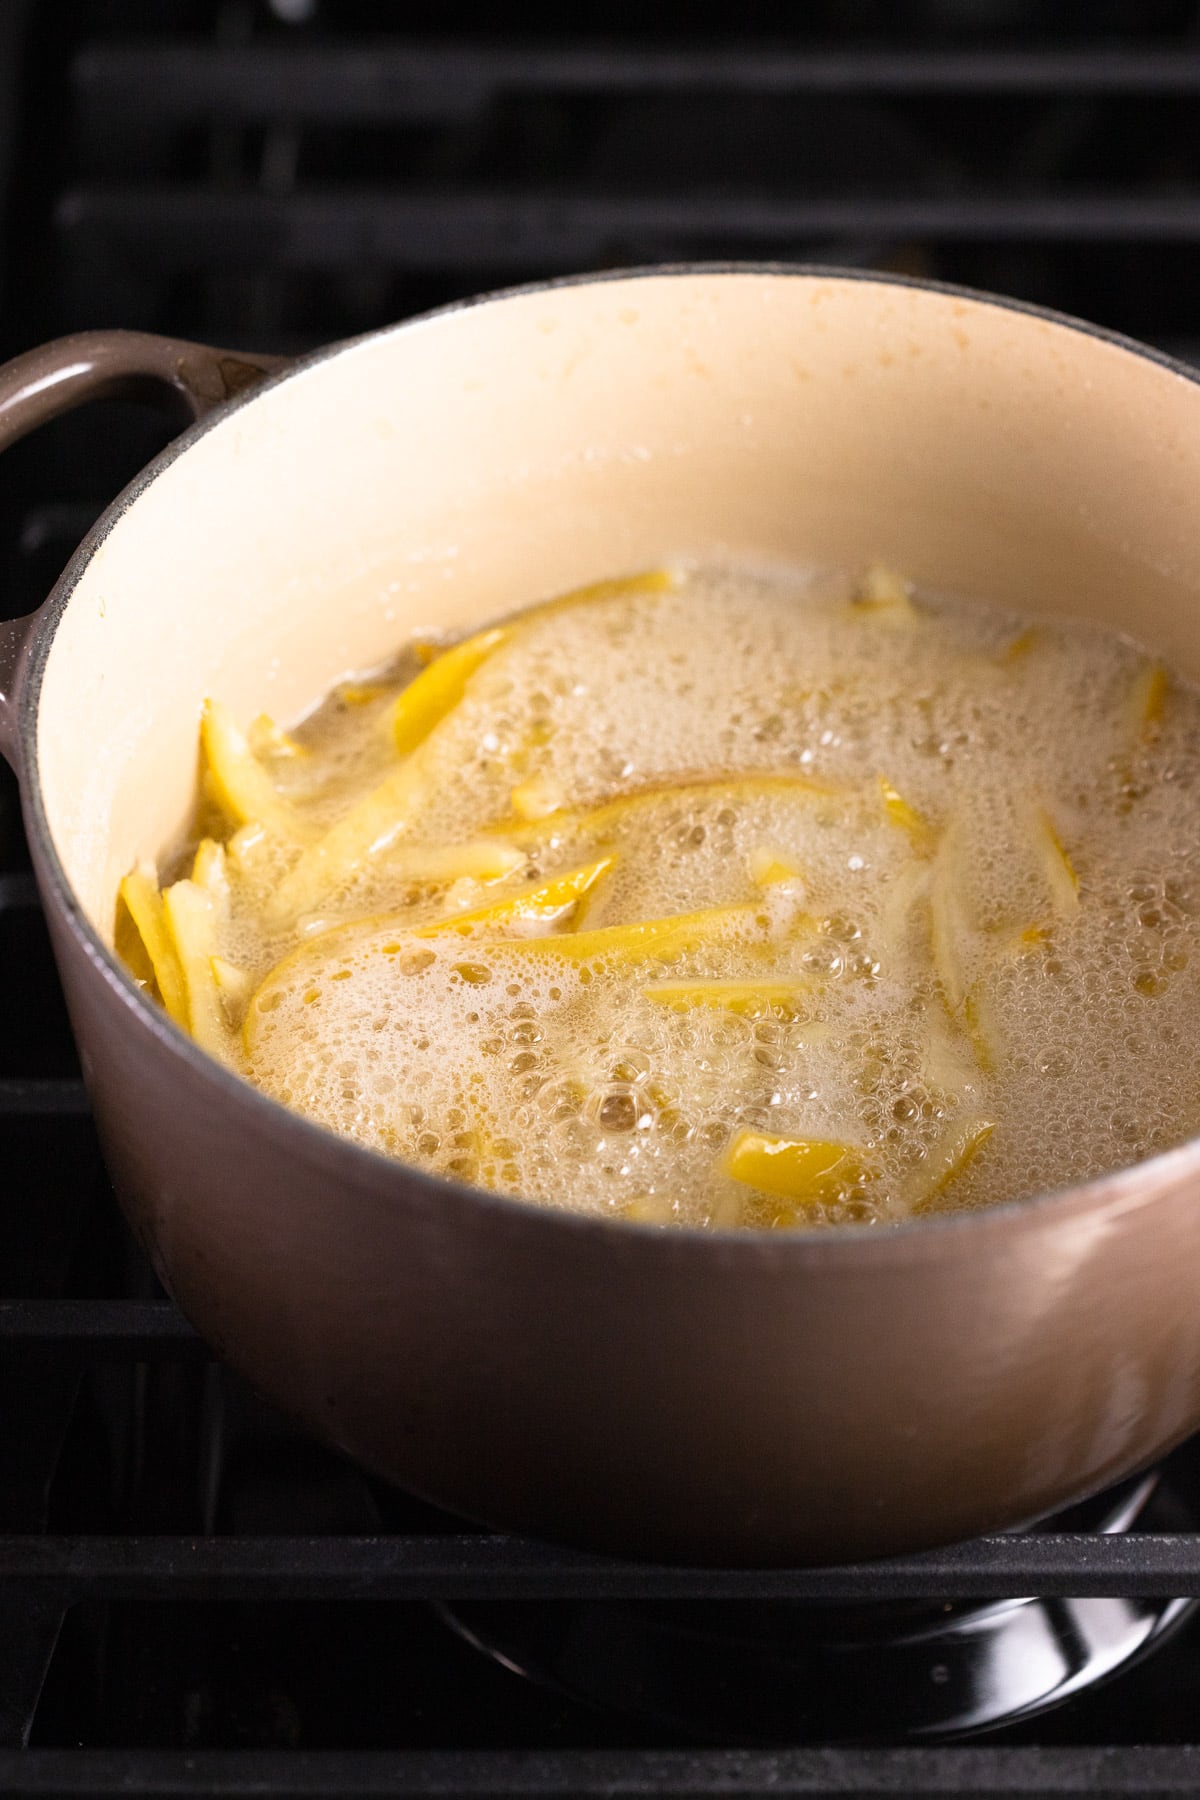 Lemon peels simmering in a sugar syrup on the stove.